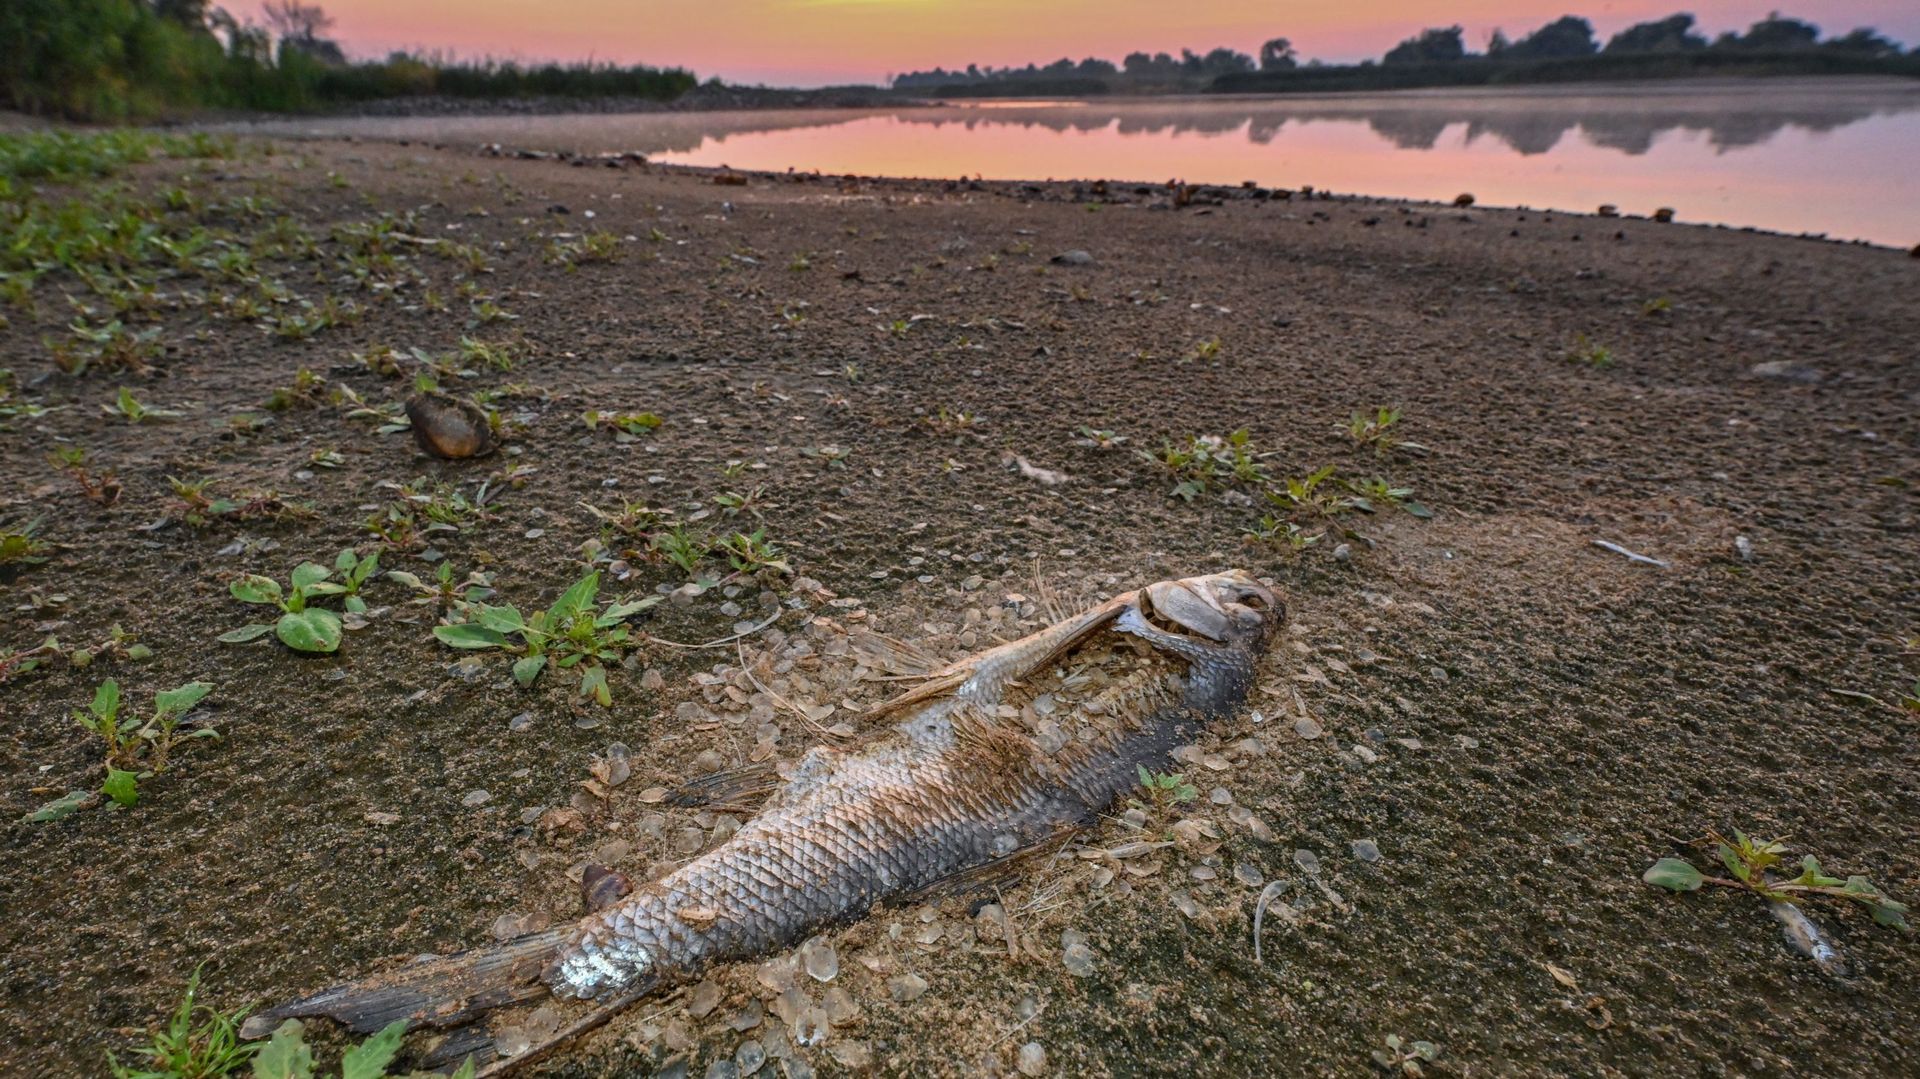 A dead fish on the bank of the German-Polish border river Oder